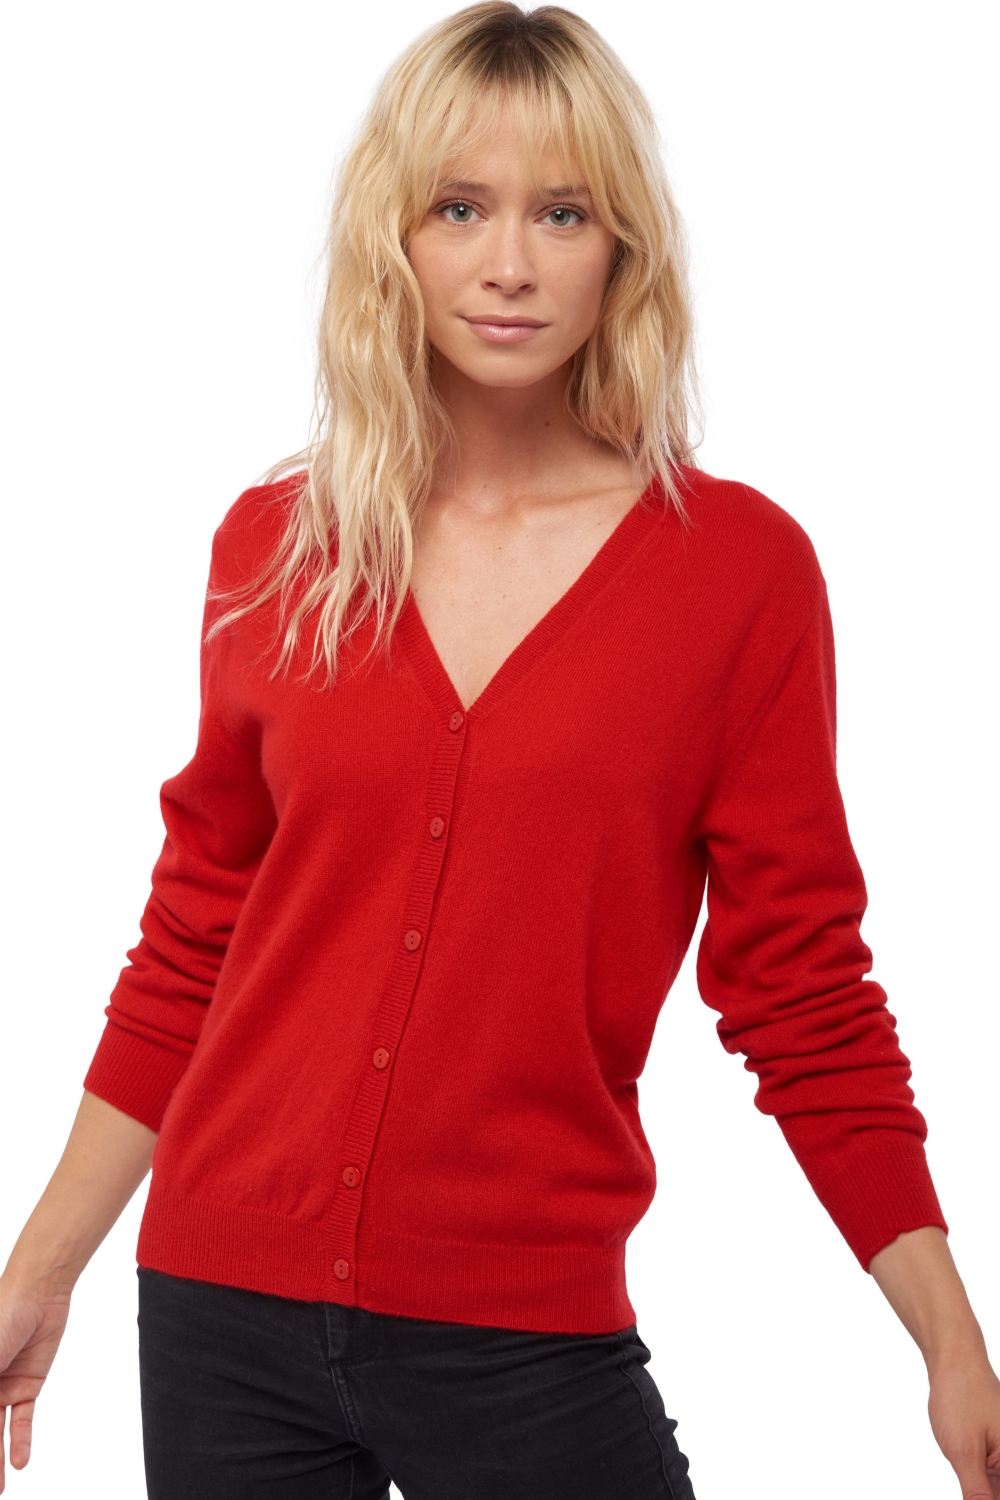 Cachemire pull femme collection printemps ete taline first chilli red s